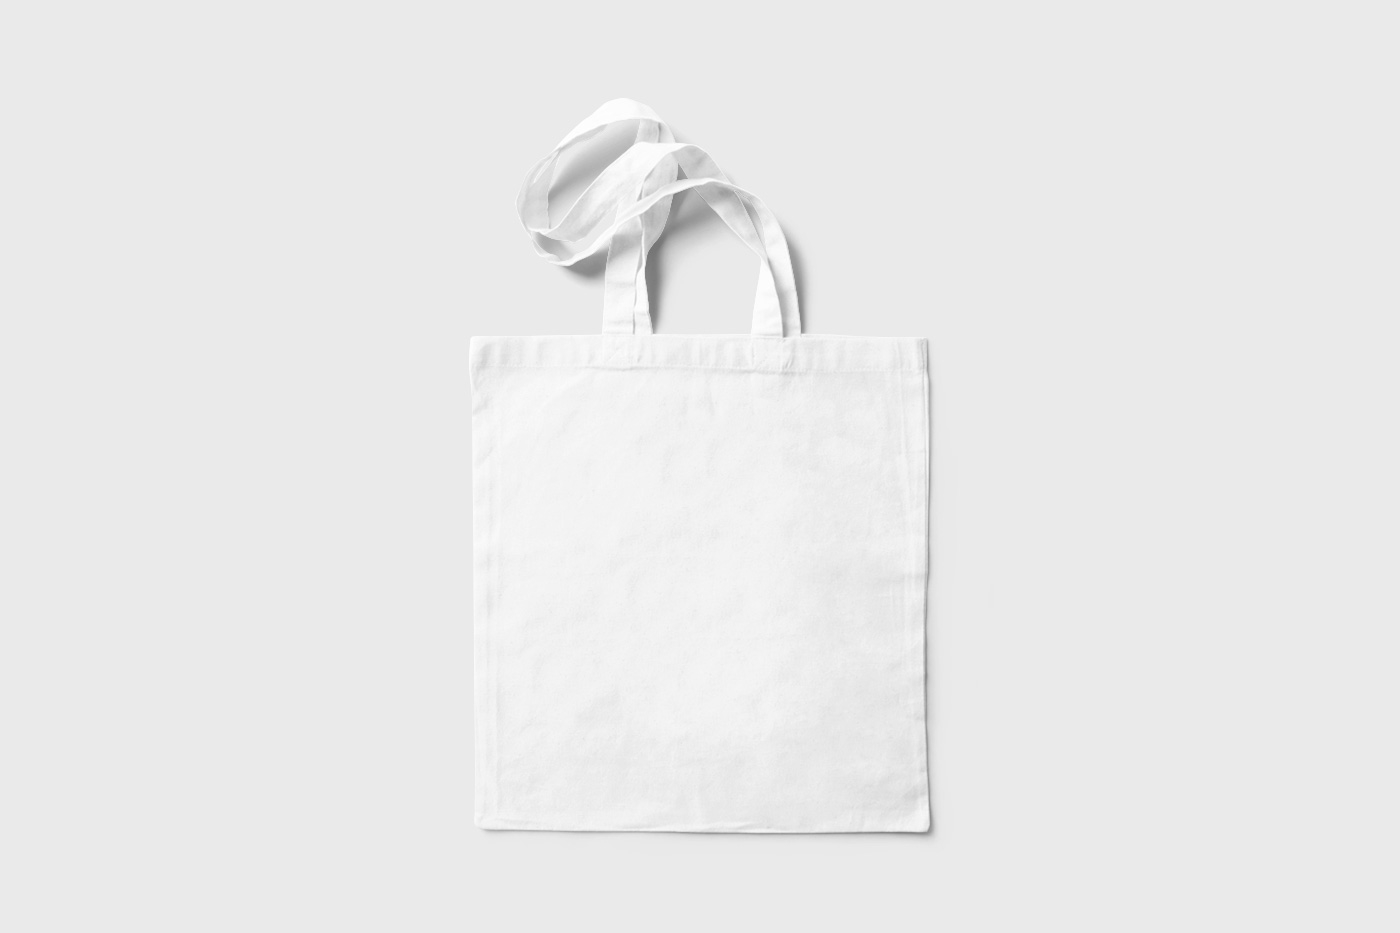 Top View of an Eco-Friendly Material Bag Mockup FREE PSD